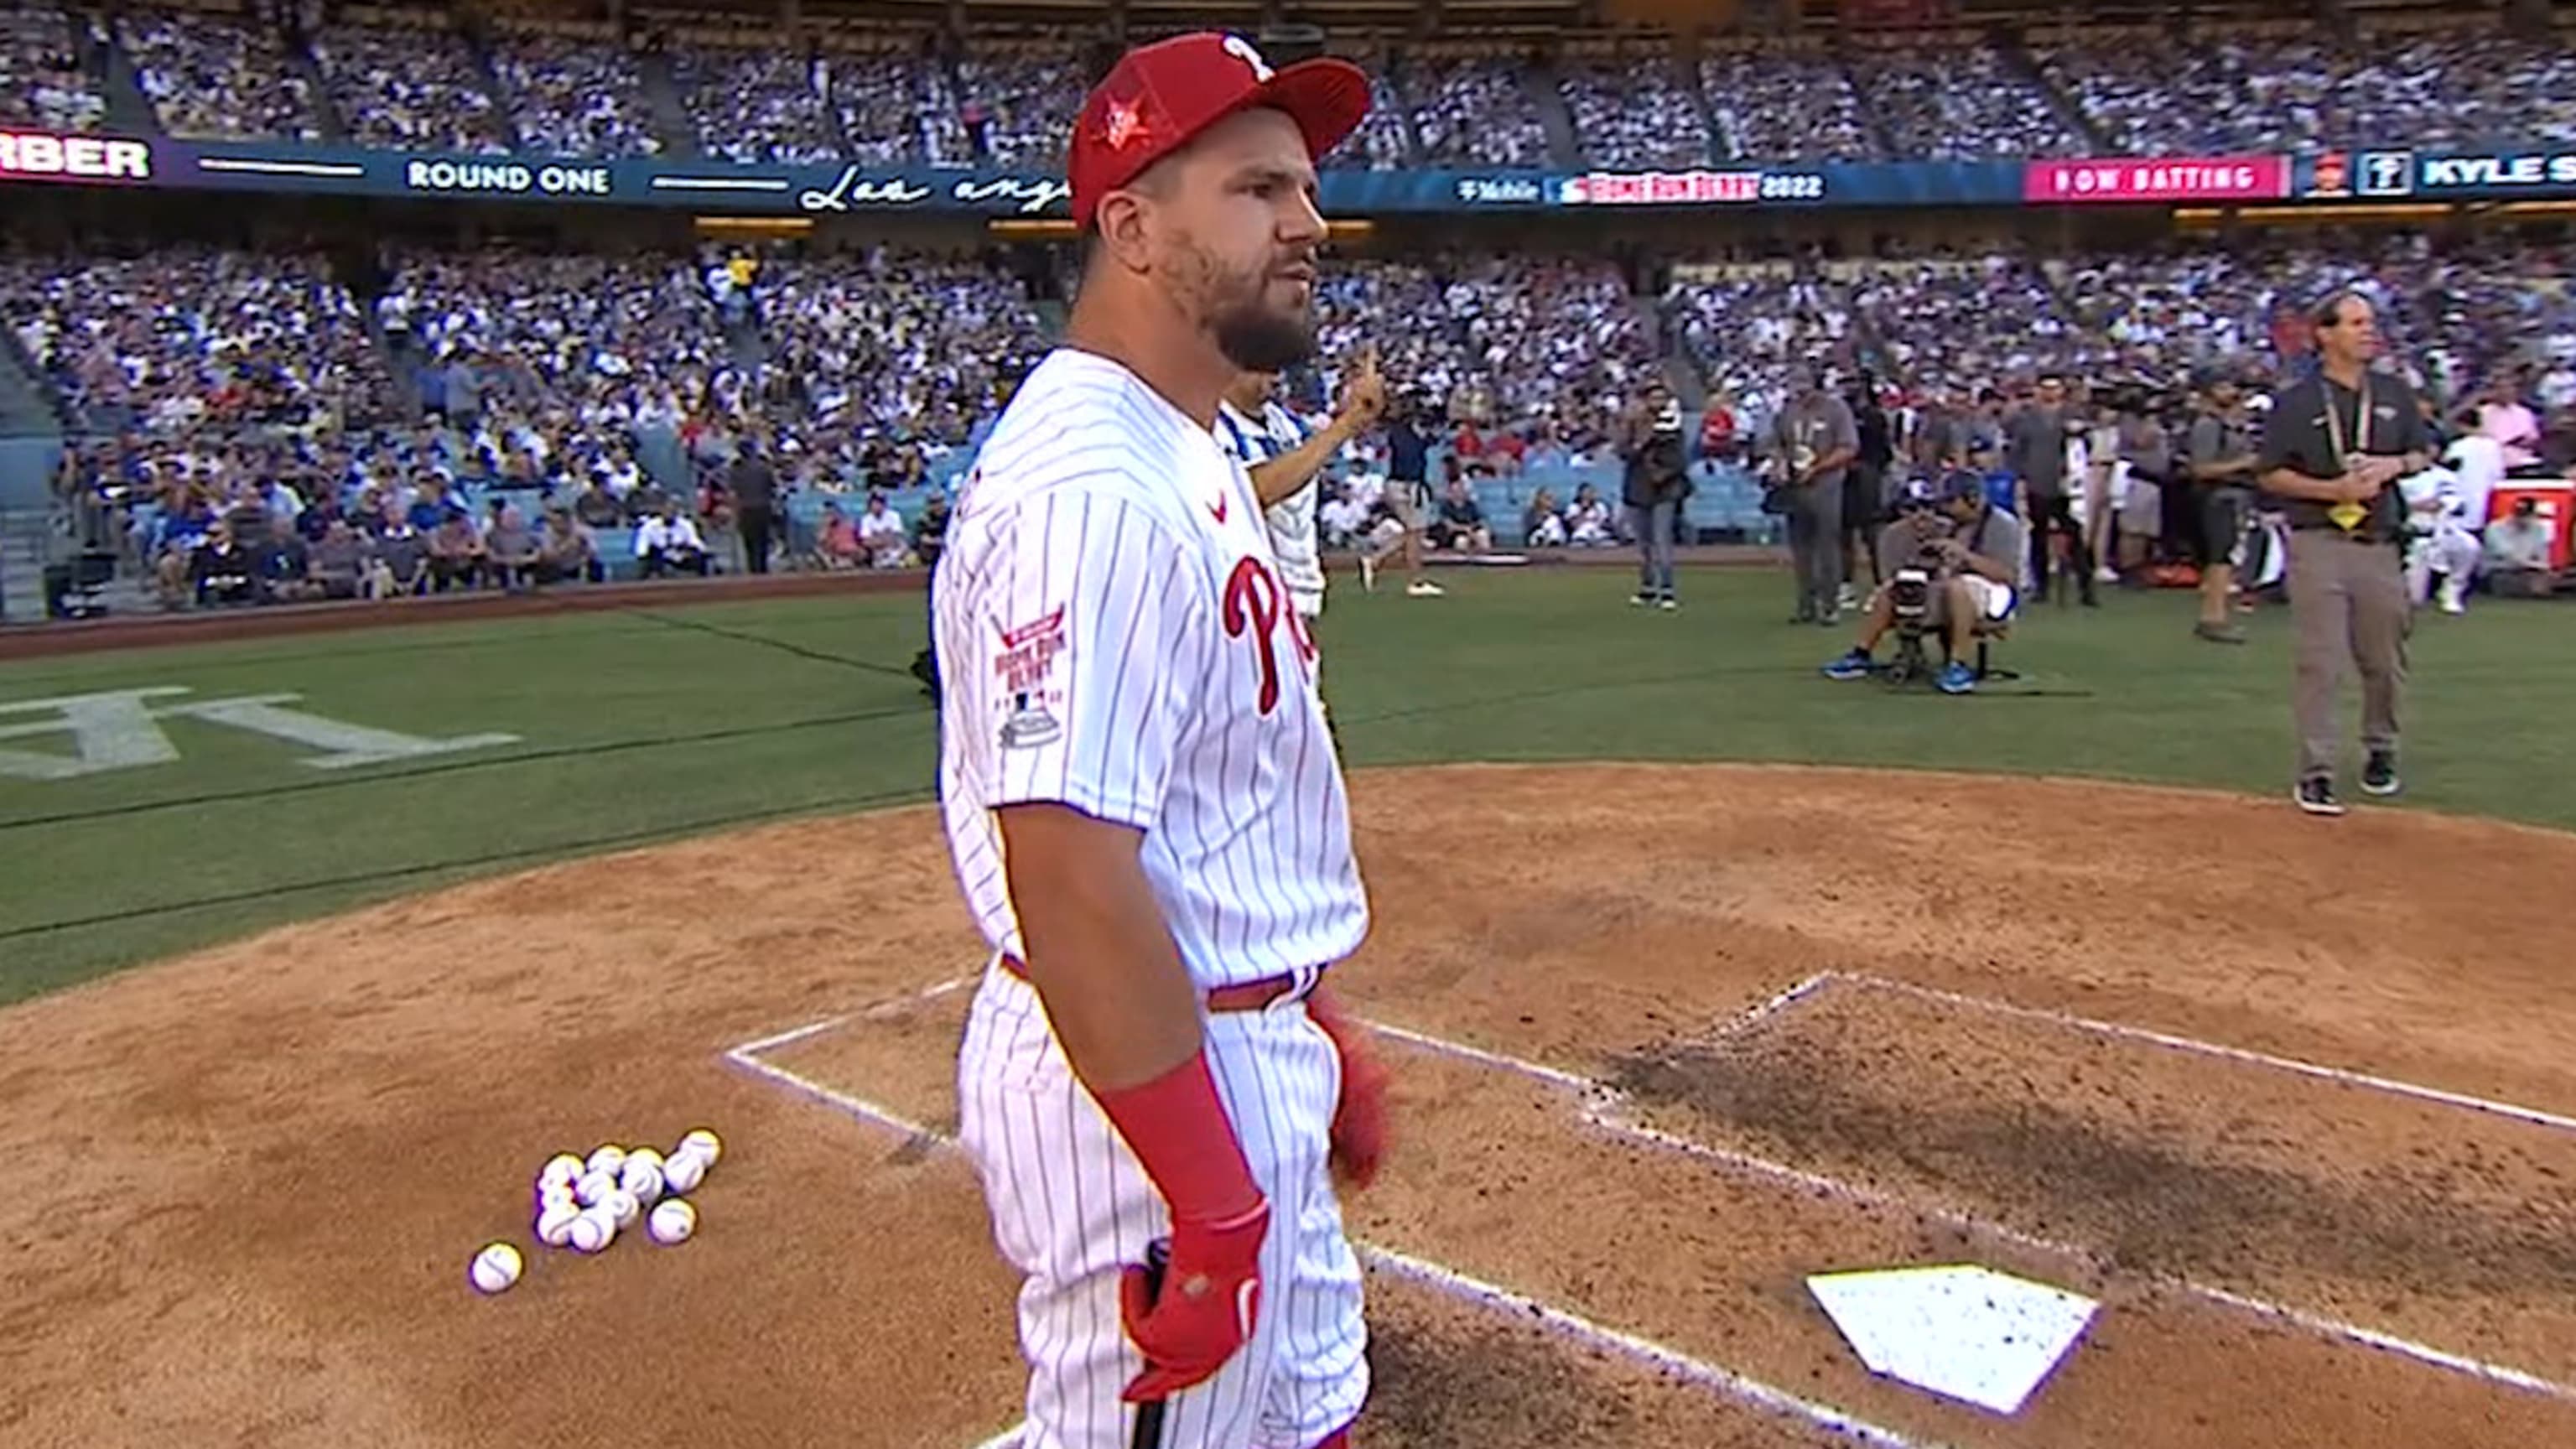 Kyle Schwarber is top seed in Home Run Derby at Dodger Stadium